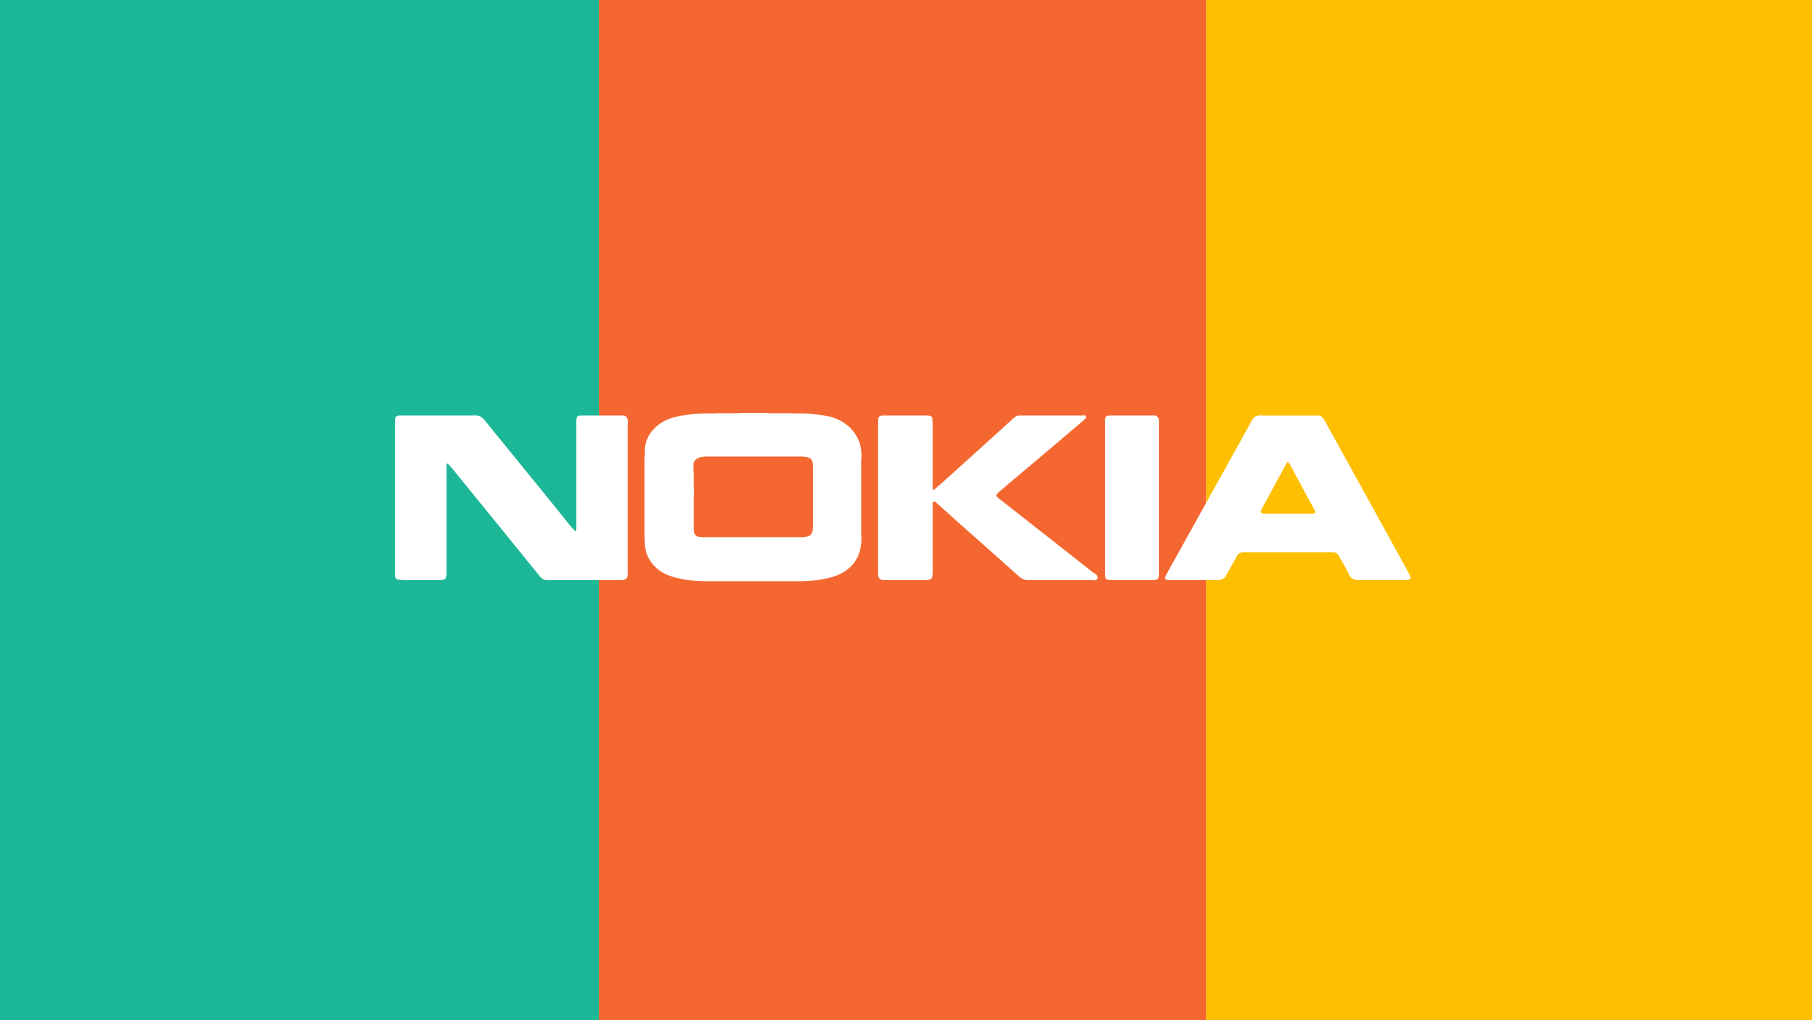 Nokia’s legacy lives on as HMD establishes its own brand